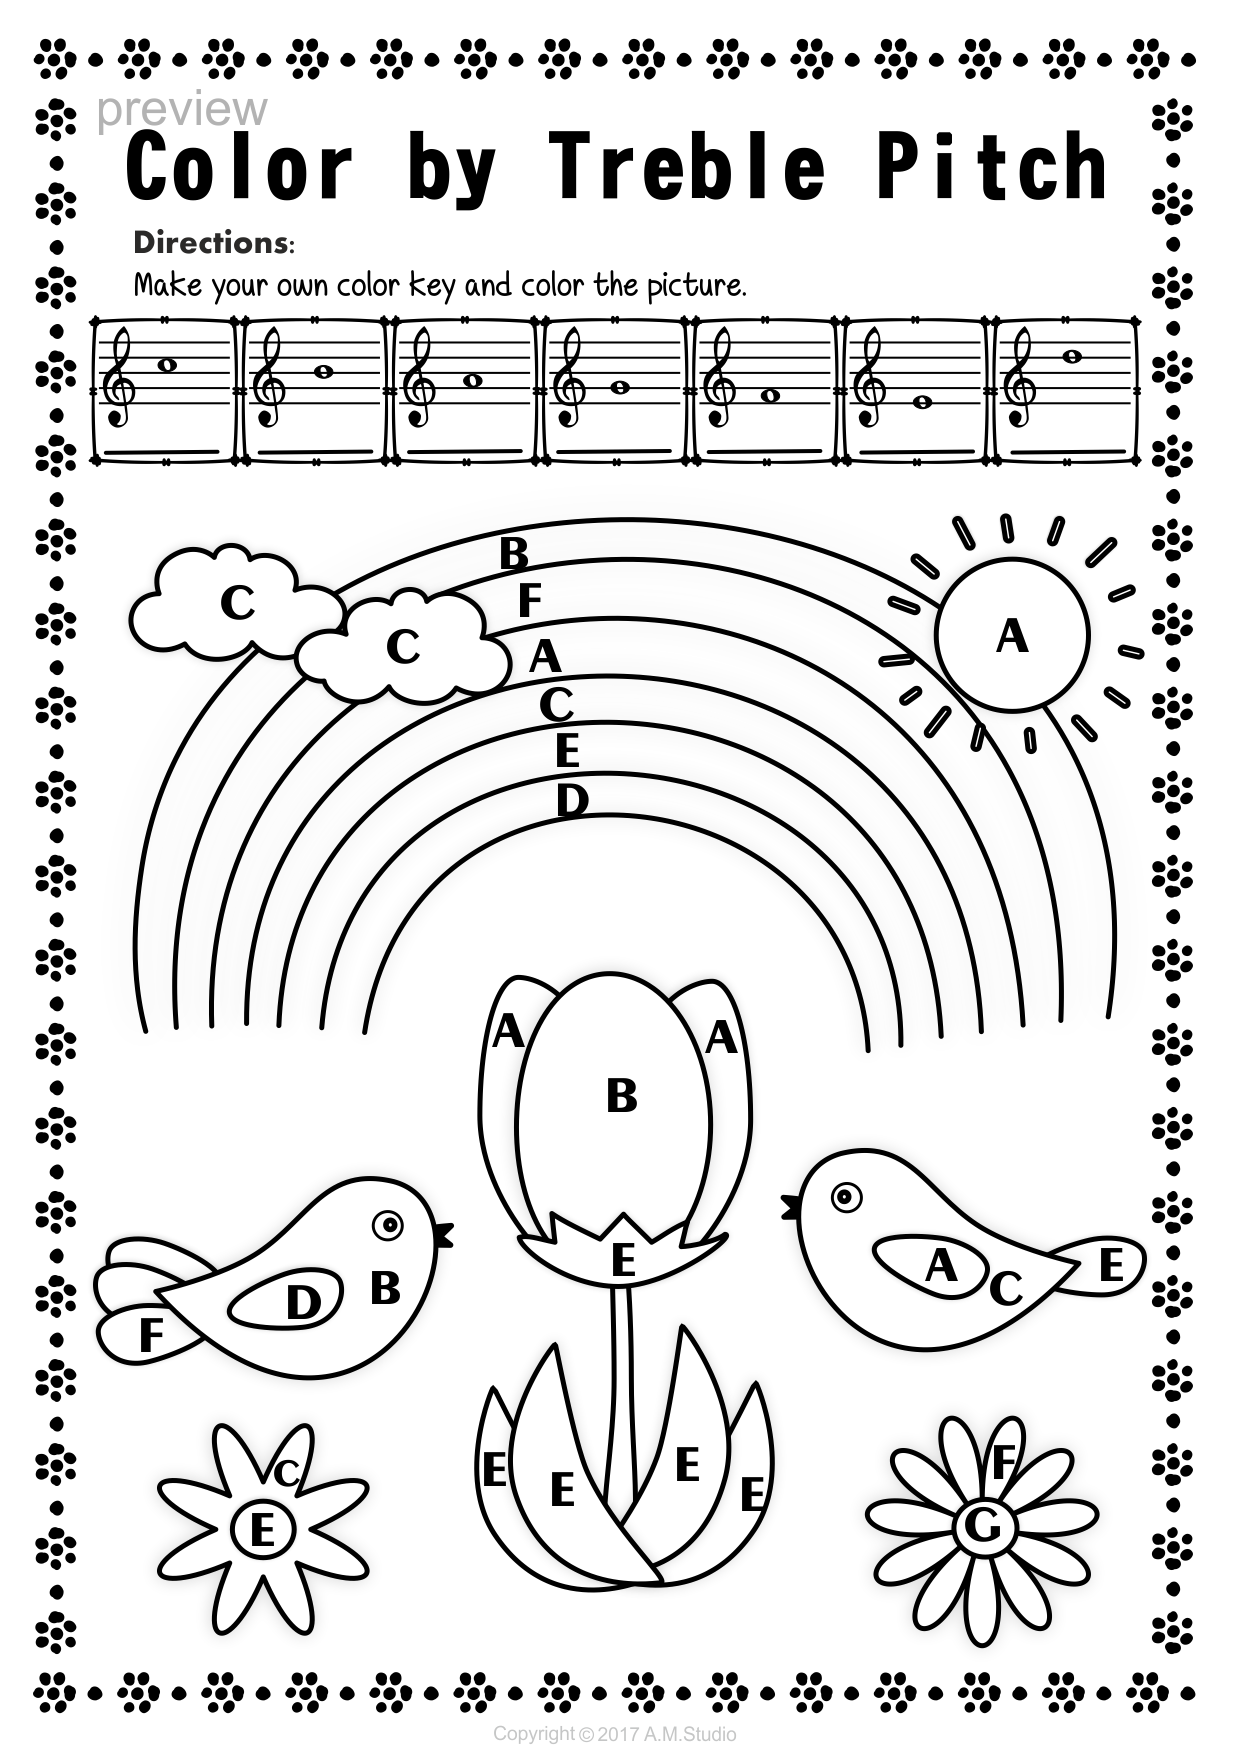 Treble Clef Note Naming Worksheets for Spring (img # 3)